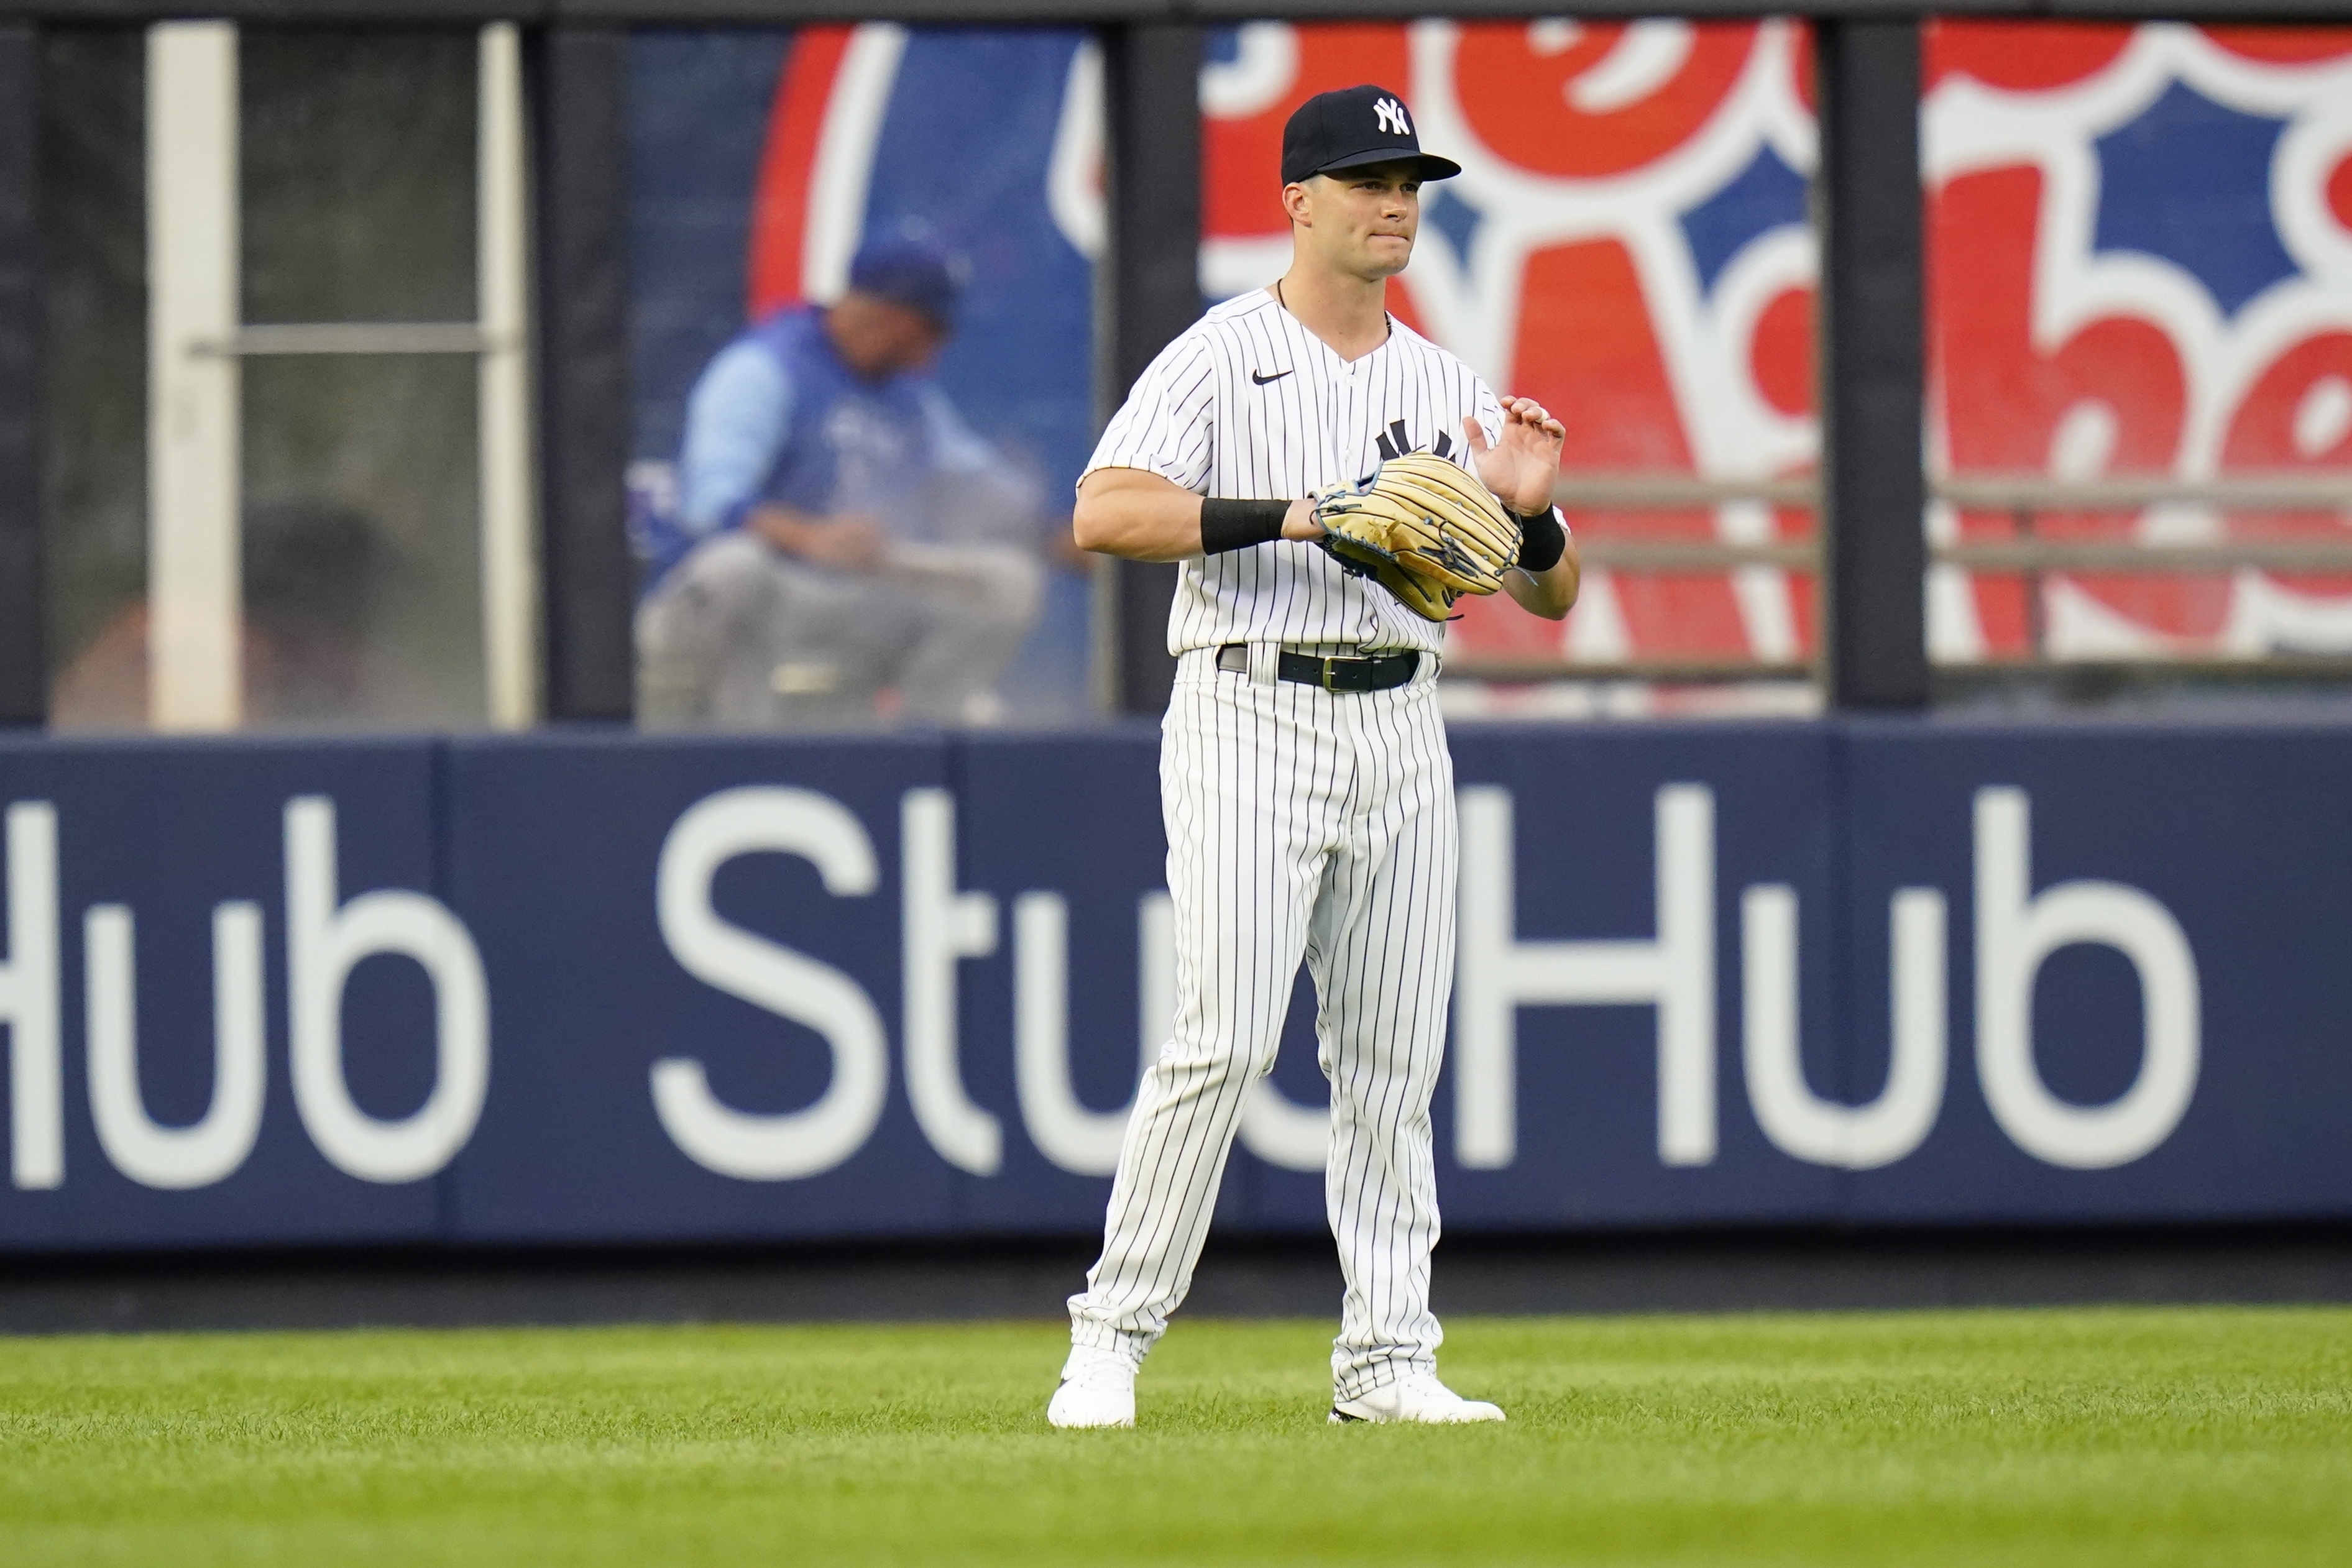 Andrew Benintendi goes 0-for-4 in Yankees debut but ex-Red Sox OF